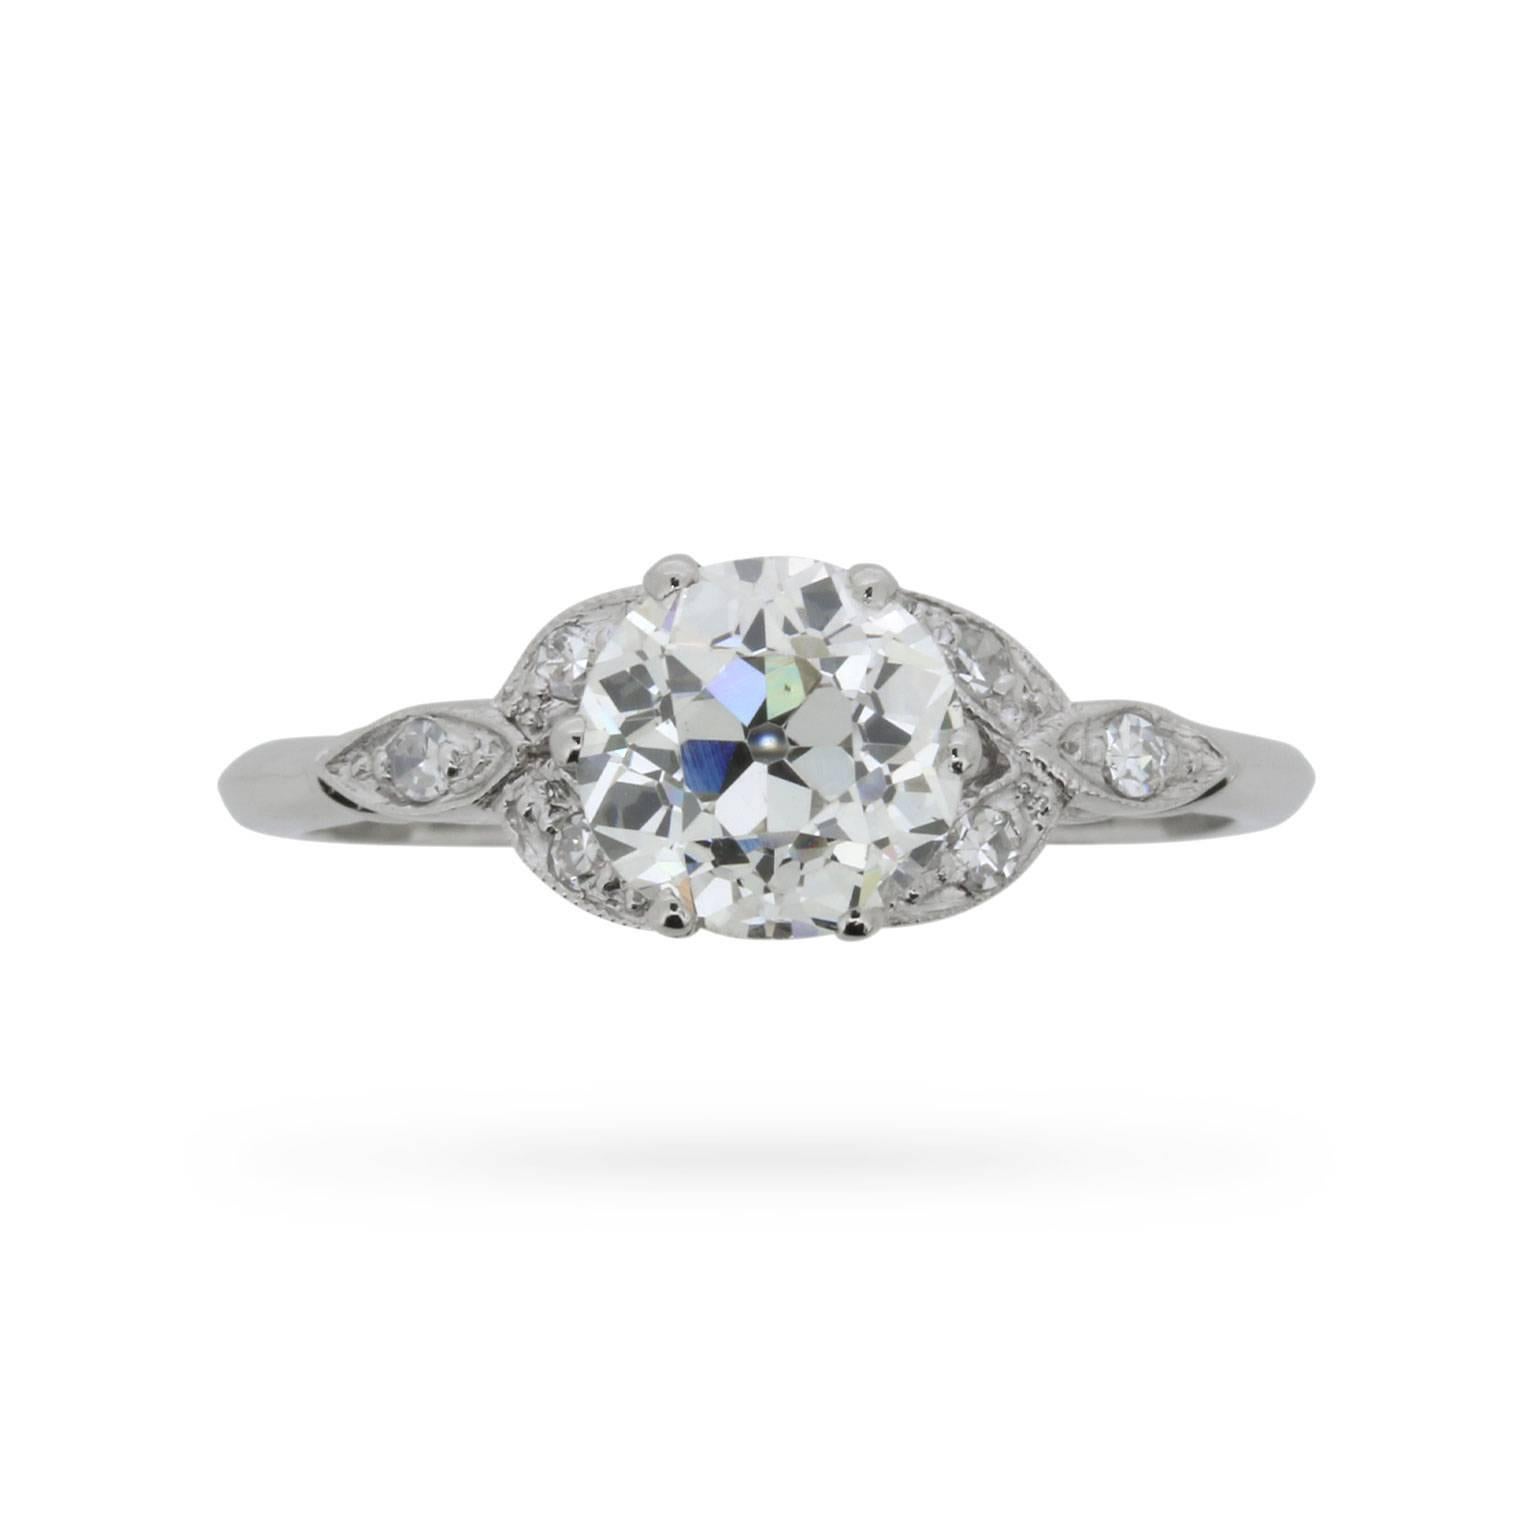 An elegant platinum and diamond engagement ring dating from the 1940s and featuring a gorgeous EDR certified 1.24 carat old cut diamond.

Grain-set eight cut diamonds add an extra splash of sparkle to the setting of this already lively solitaire,